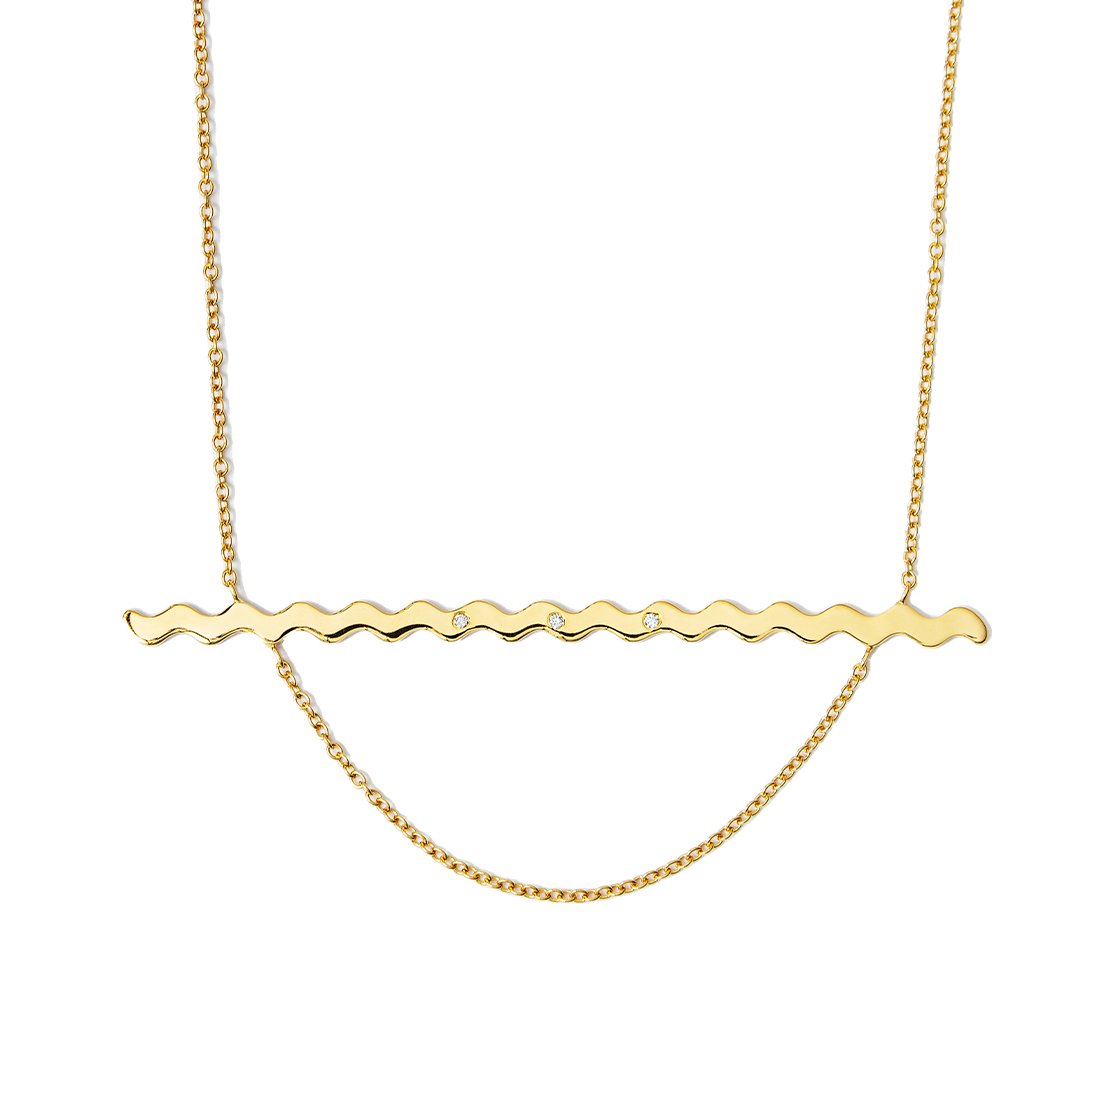 NUWL RIPPLE NECKLACE GOLD